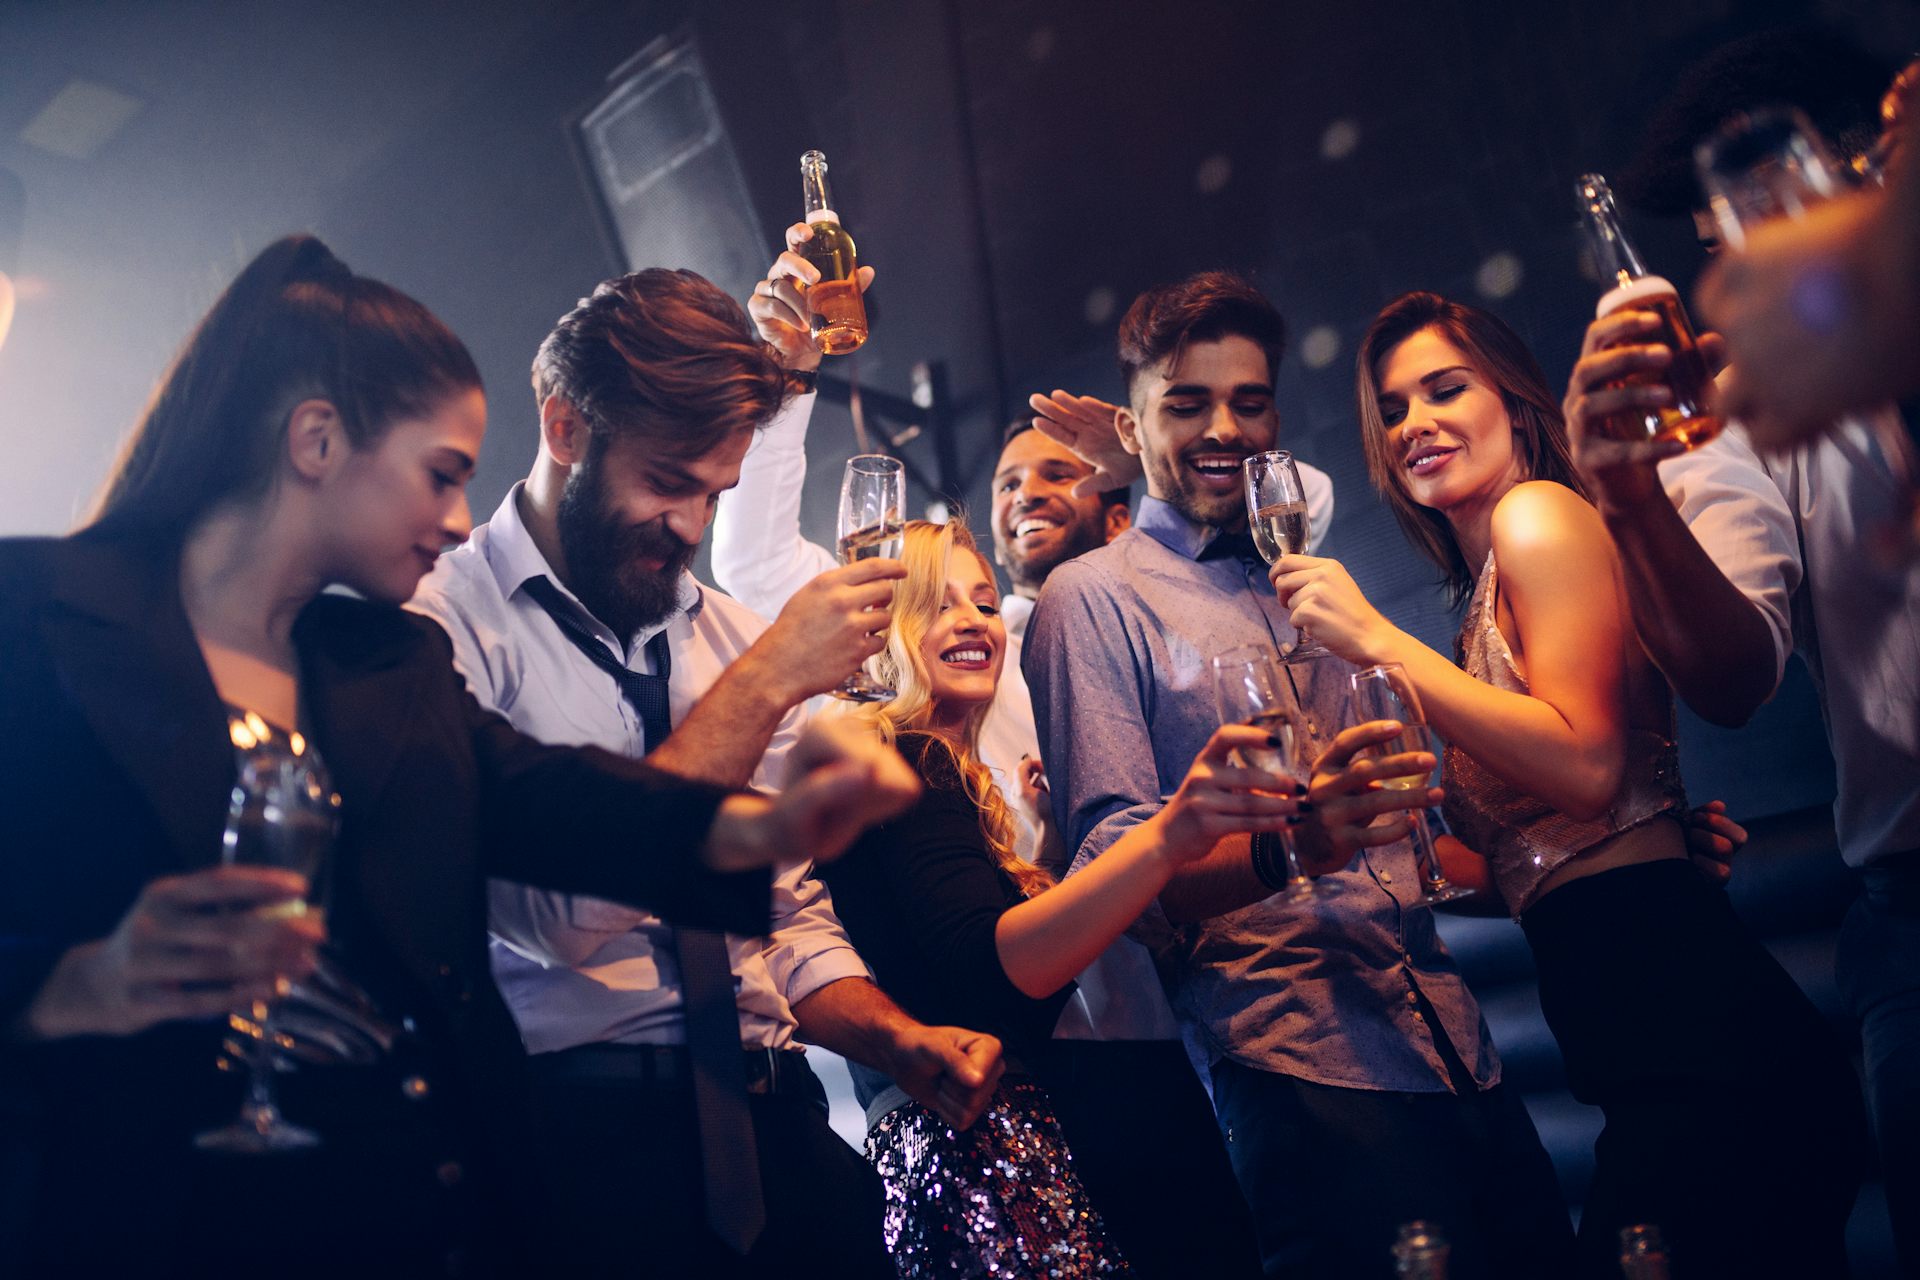 Groping, grinding, grabbing new research on nightclubs finds men do it often but know its wrong photo